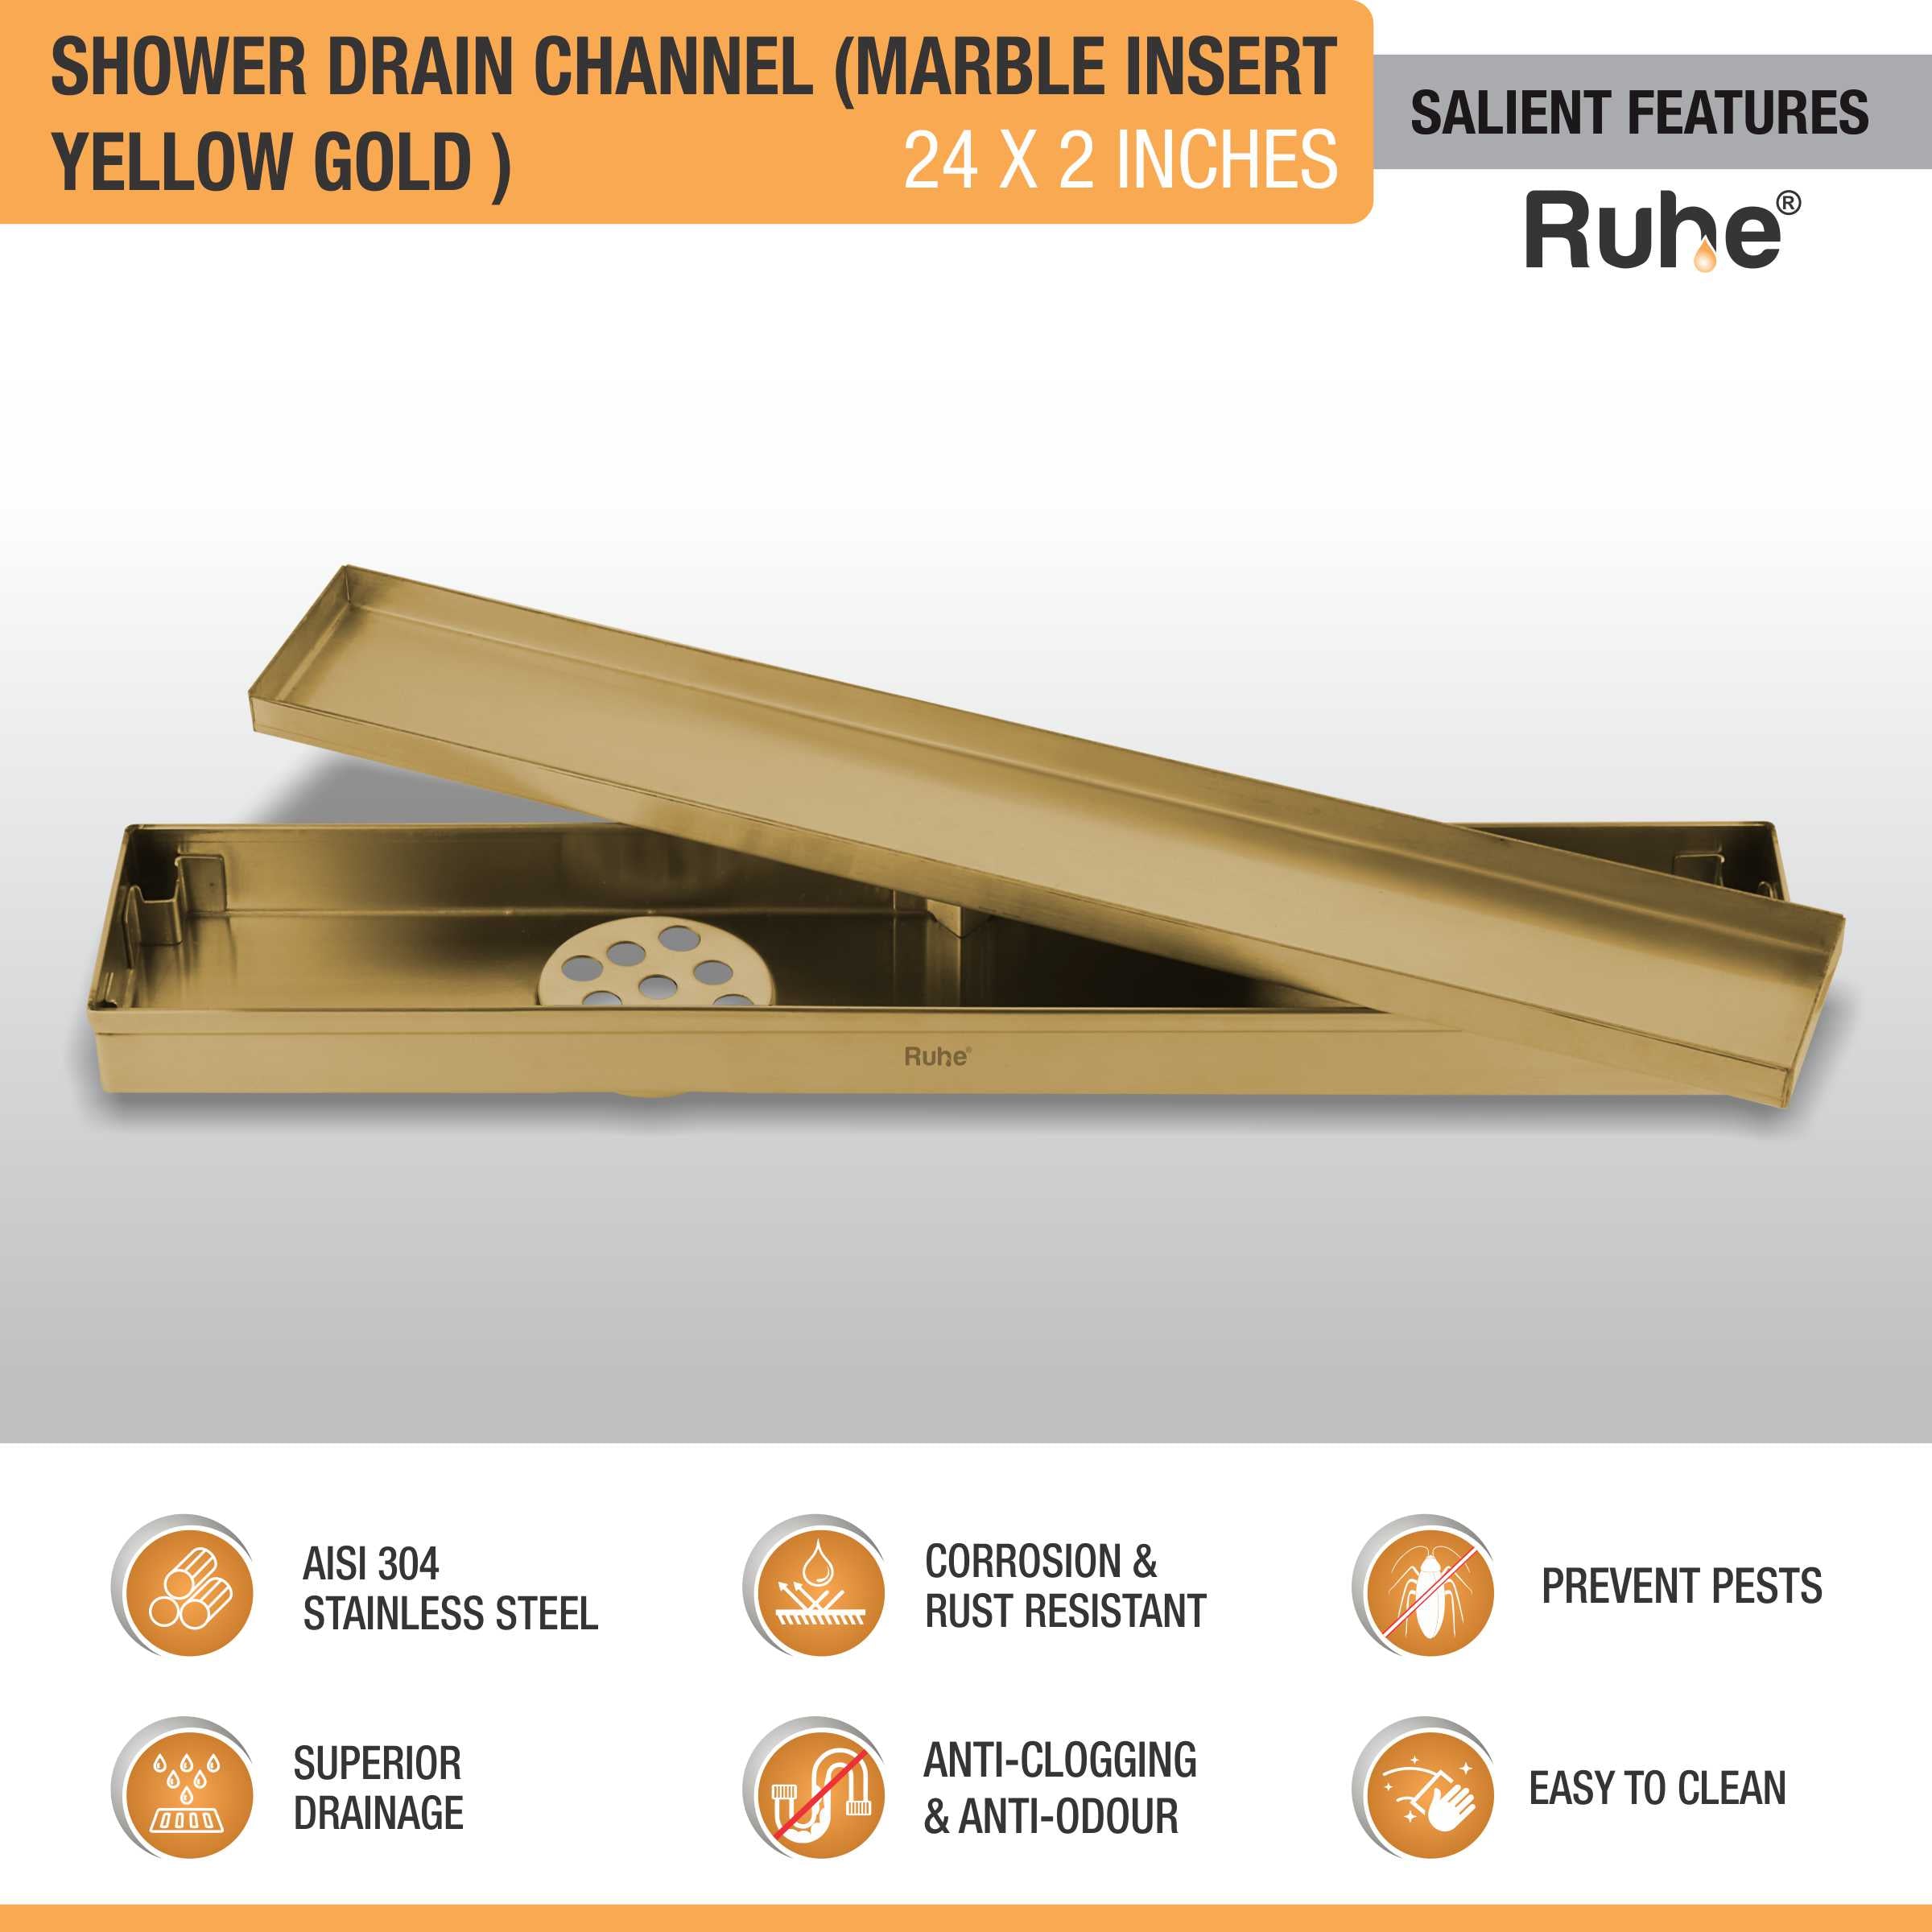 Marble Insert Shower Drain Channel (24 x 2 Inches) YELLOW GOLD features